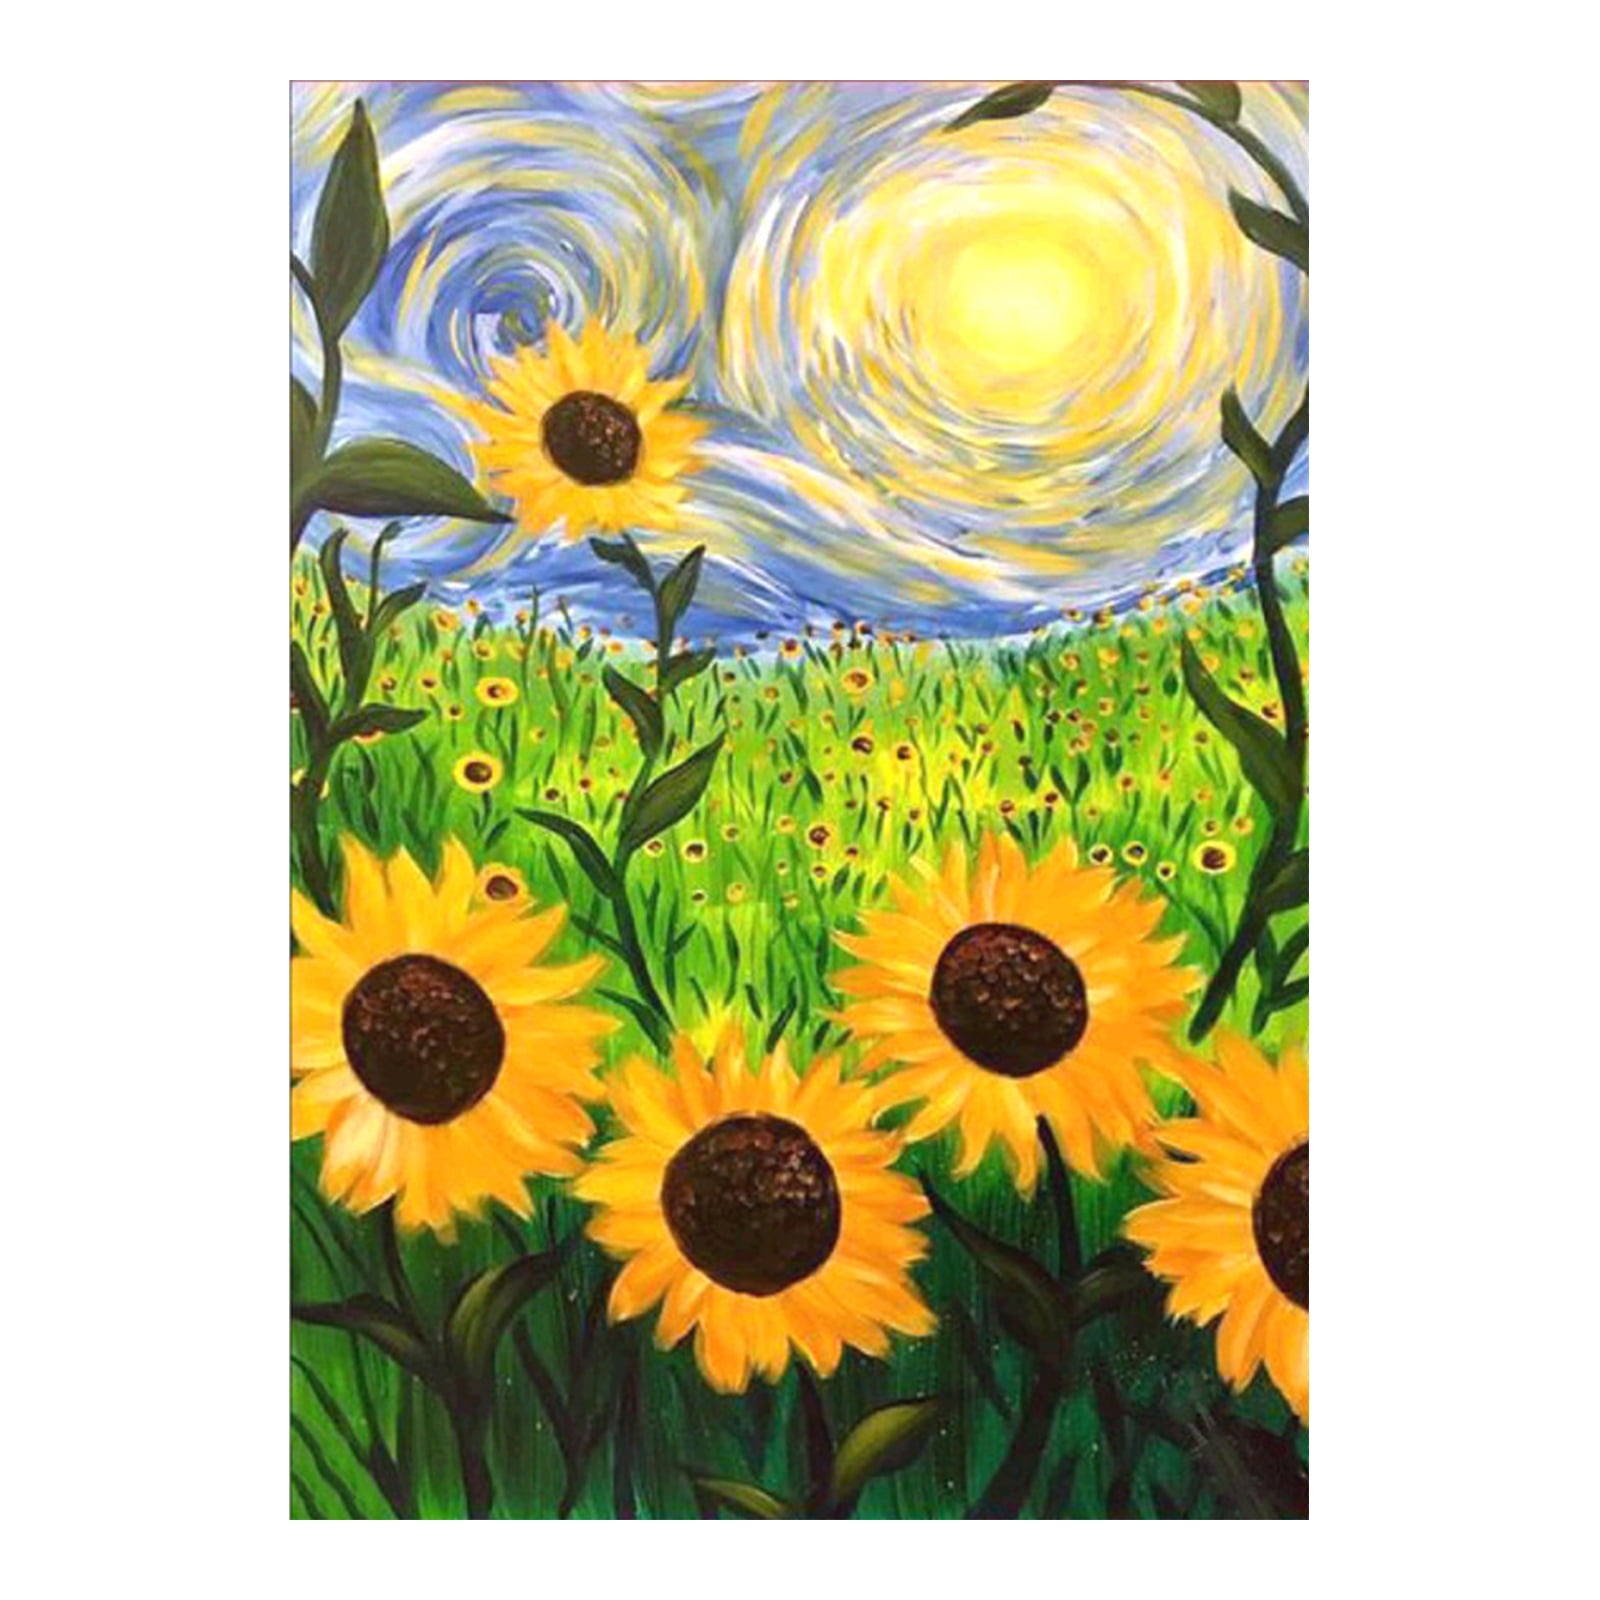 Diamond Painting Kits for Adults DIY Picture 5D Adult Diamonds Art for Kids Paint Accessories Full Drill Kit Crystal Rhinestone Embroidery Pictures Home Wall Decor Sunflower in the Dark, 12 x 16 in 